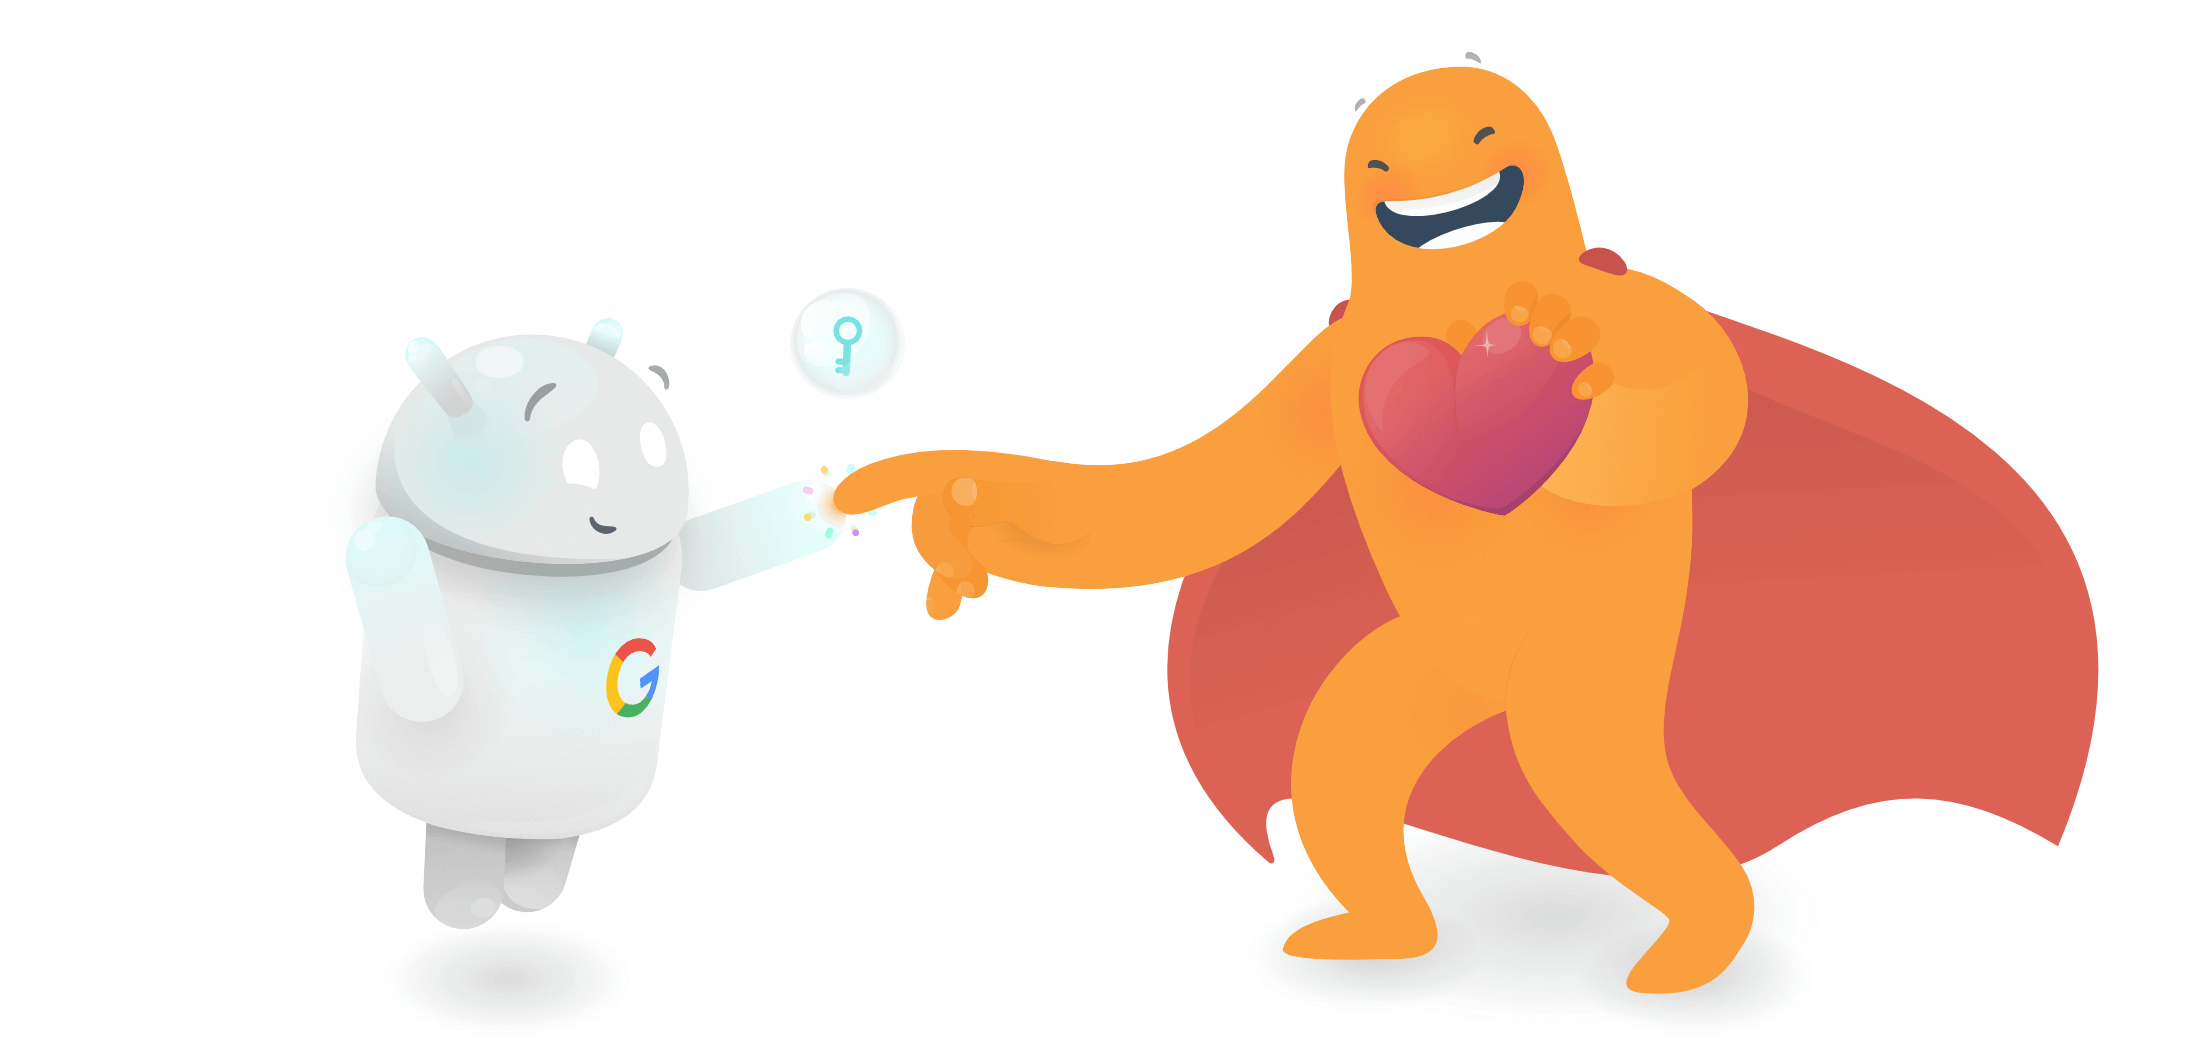 An illustration showing SurveyLegend's mascot and Google's robot, becoming friends